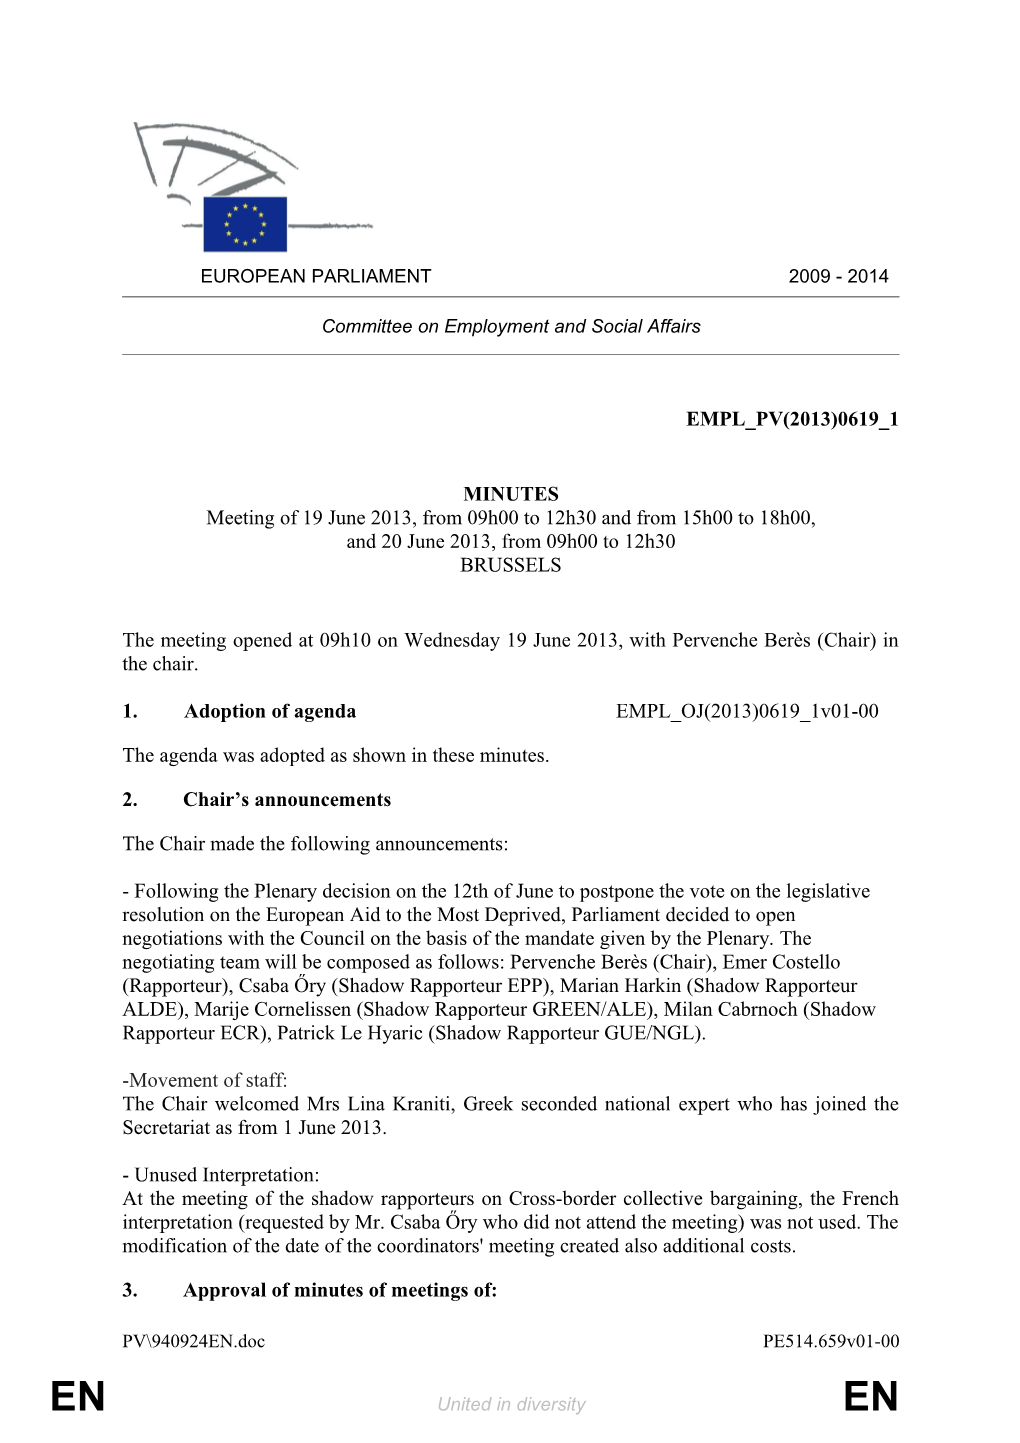 Commission&gt; EMPL Committee on Employment and Social Affairs&lt;/ Commission